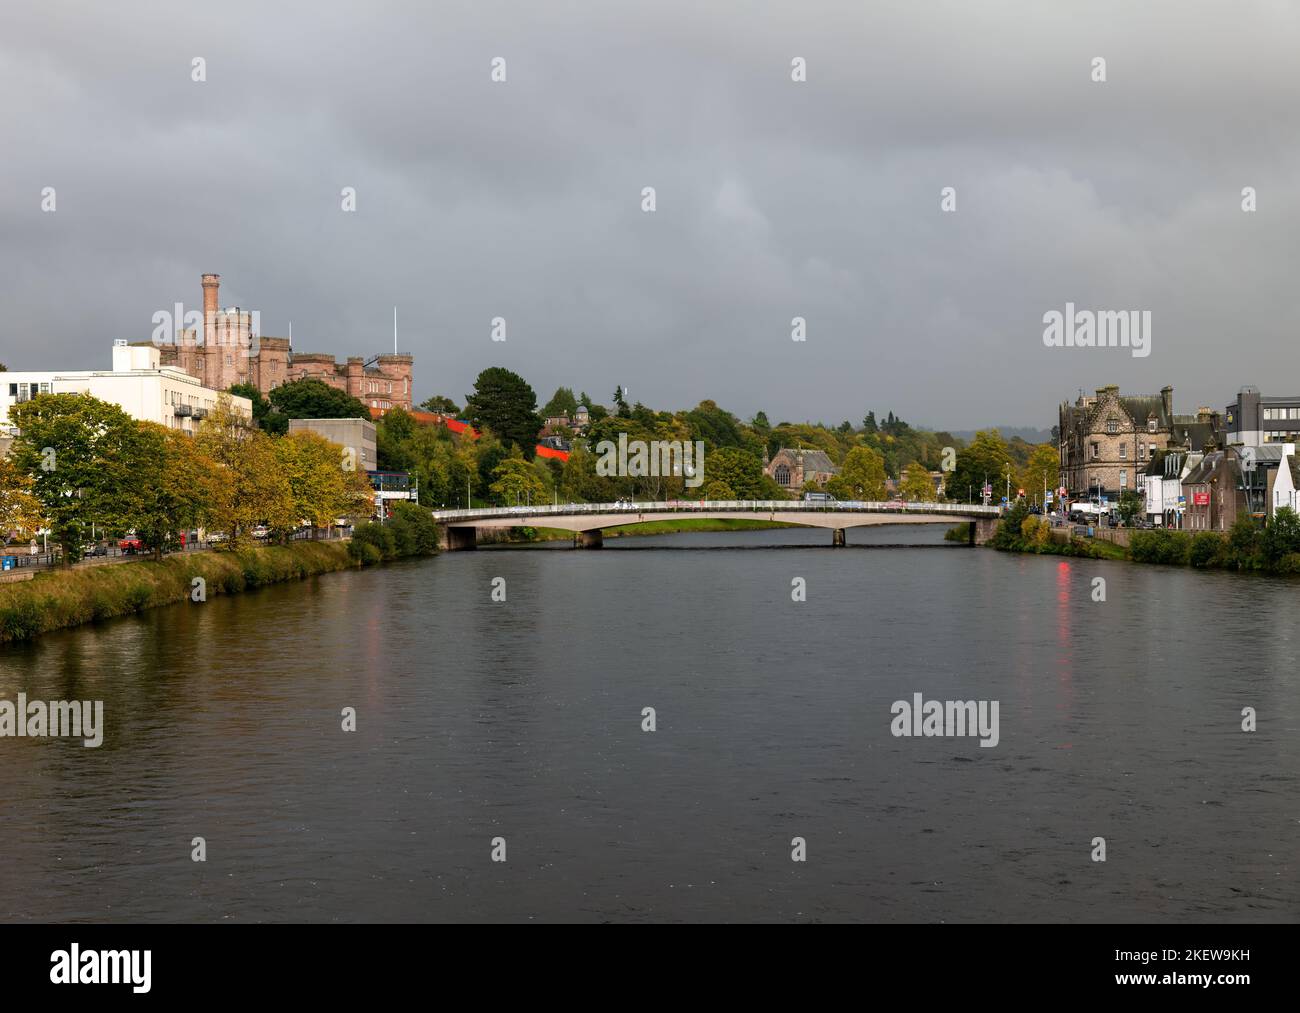 17 October 2022. Inverness,Highlands and Islands,Scotland. This is a scene around the River Ness in the City Centre showing the Castle, Restaurants an Stock Photo